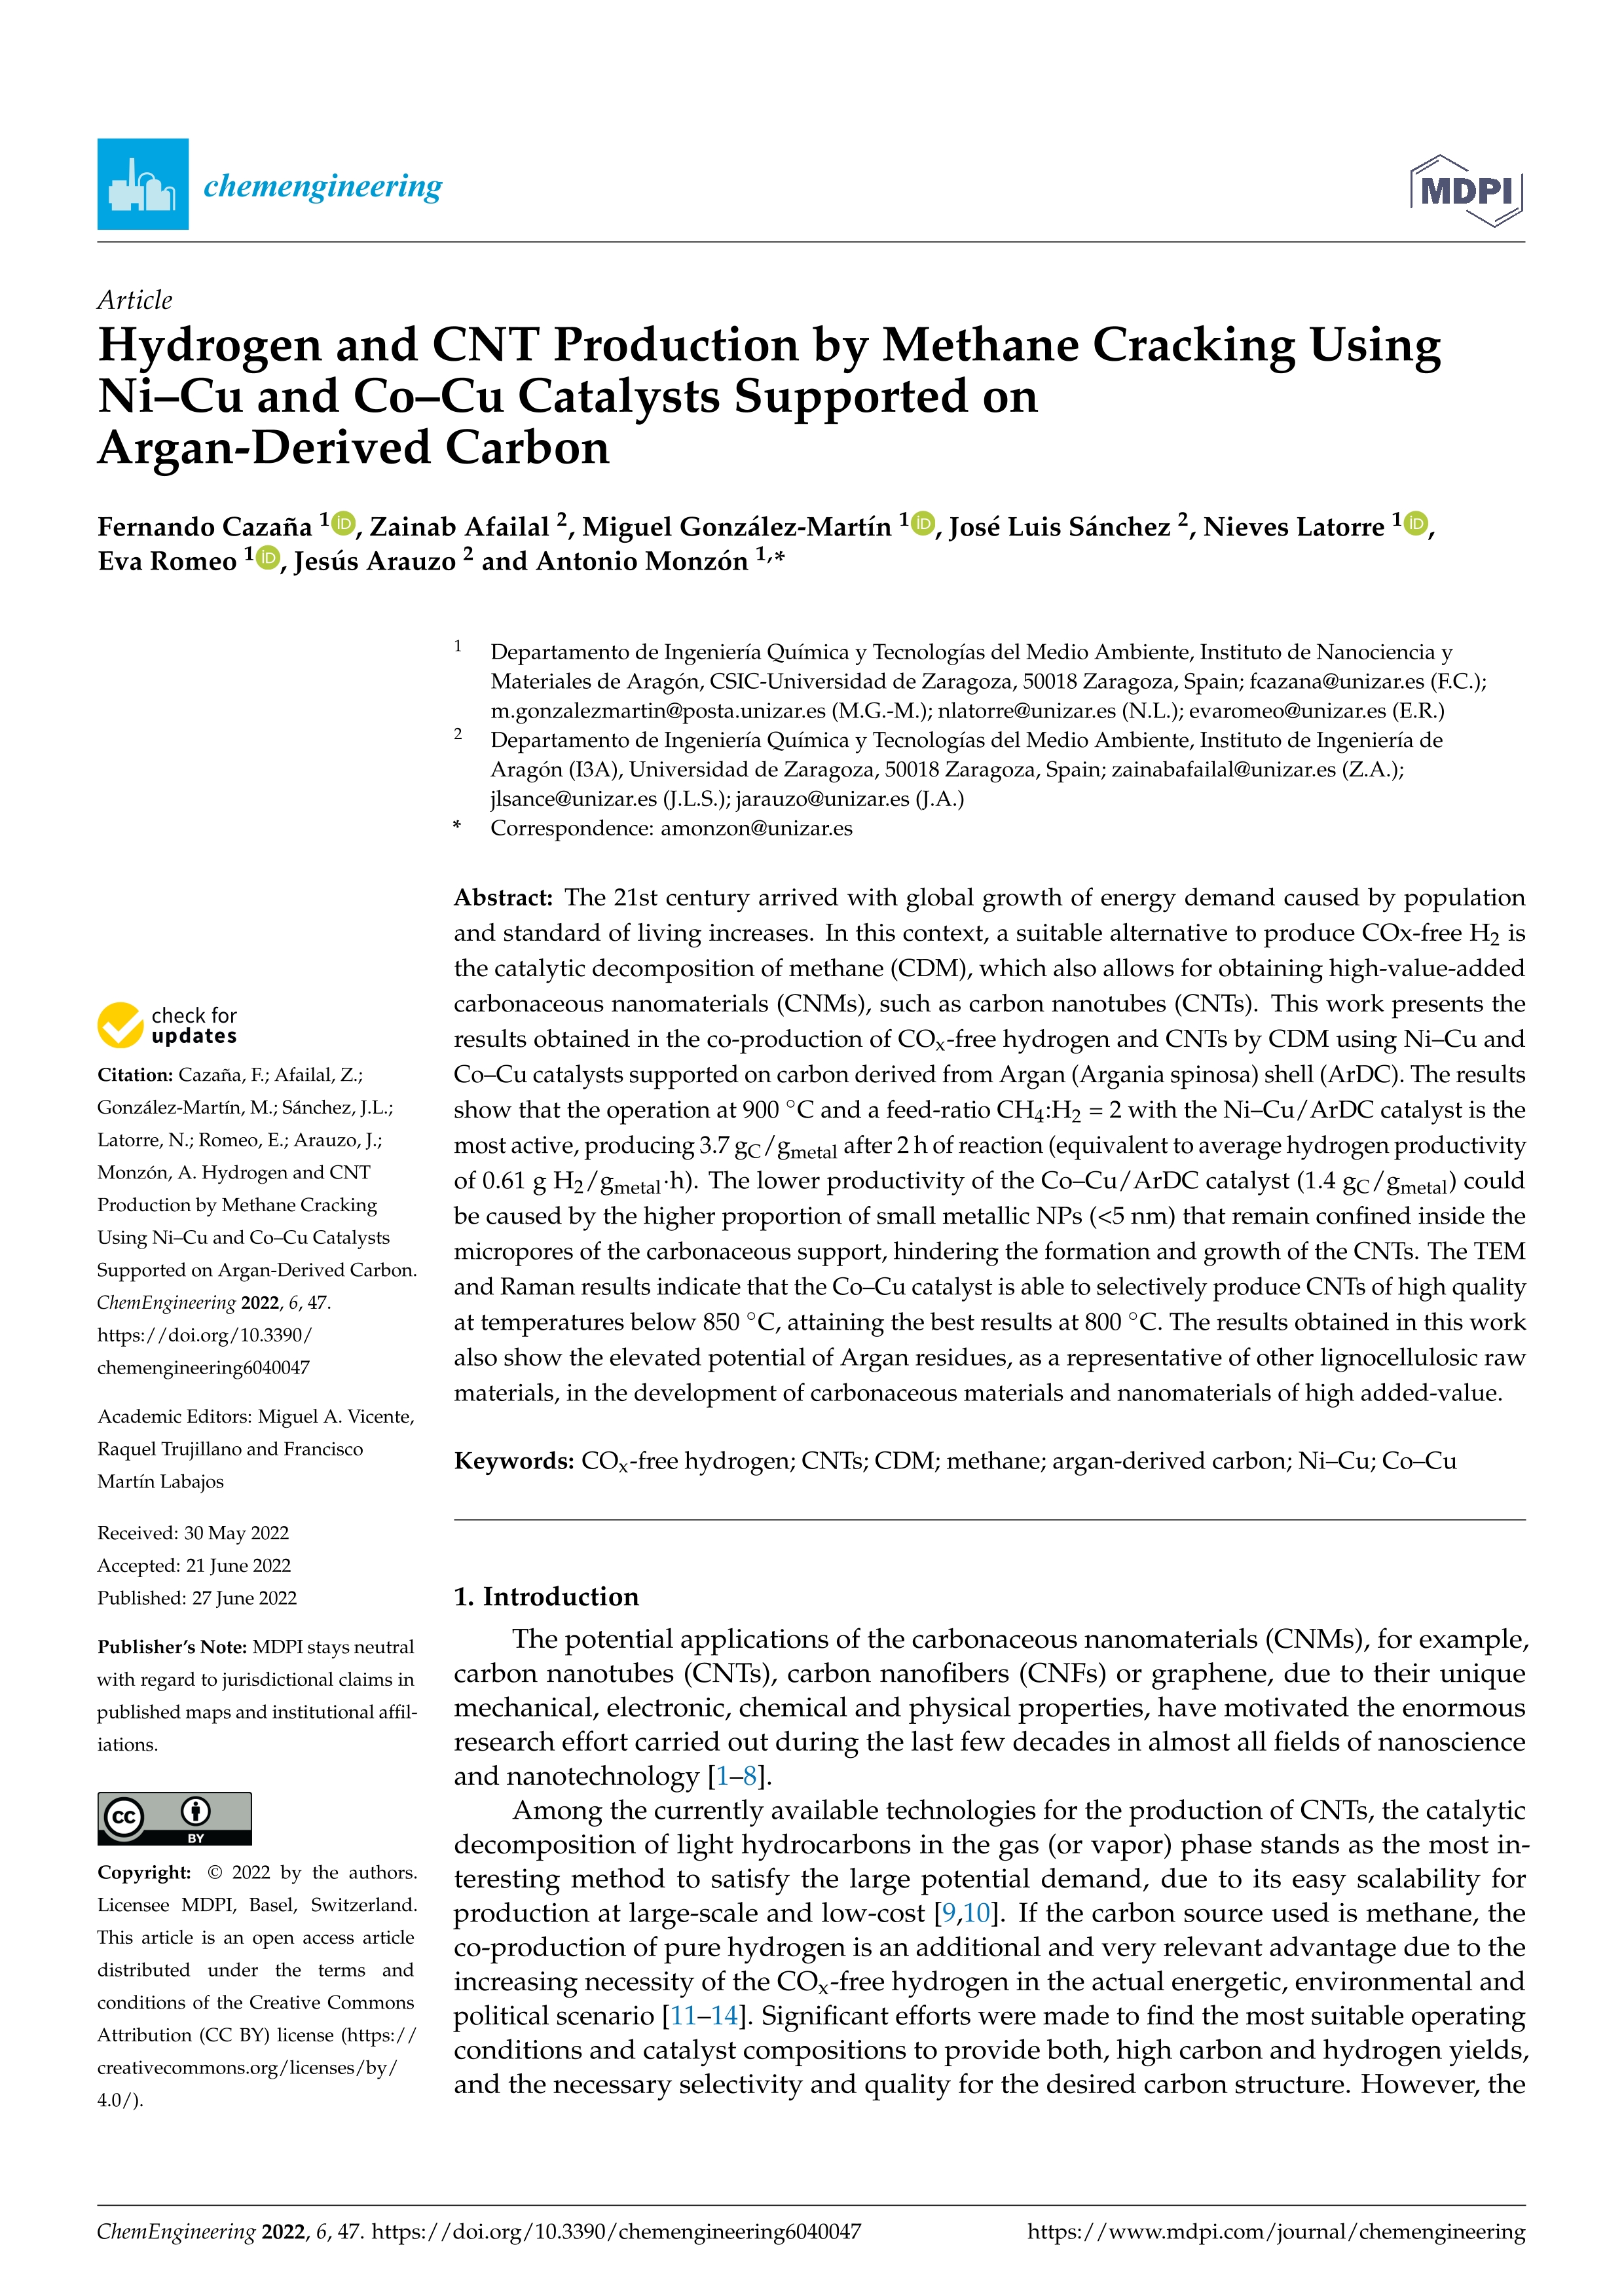 Hydrogen and CNT production by methane cracking using Ni–Cu and Co–Cu catalysts supported on argan-derived carbon